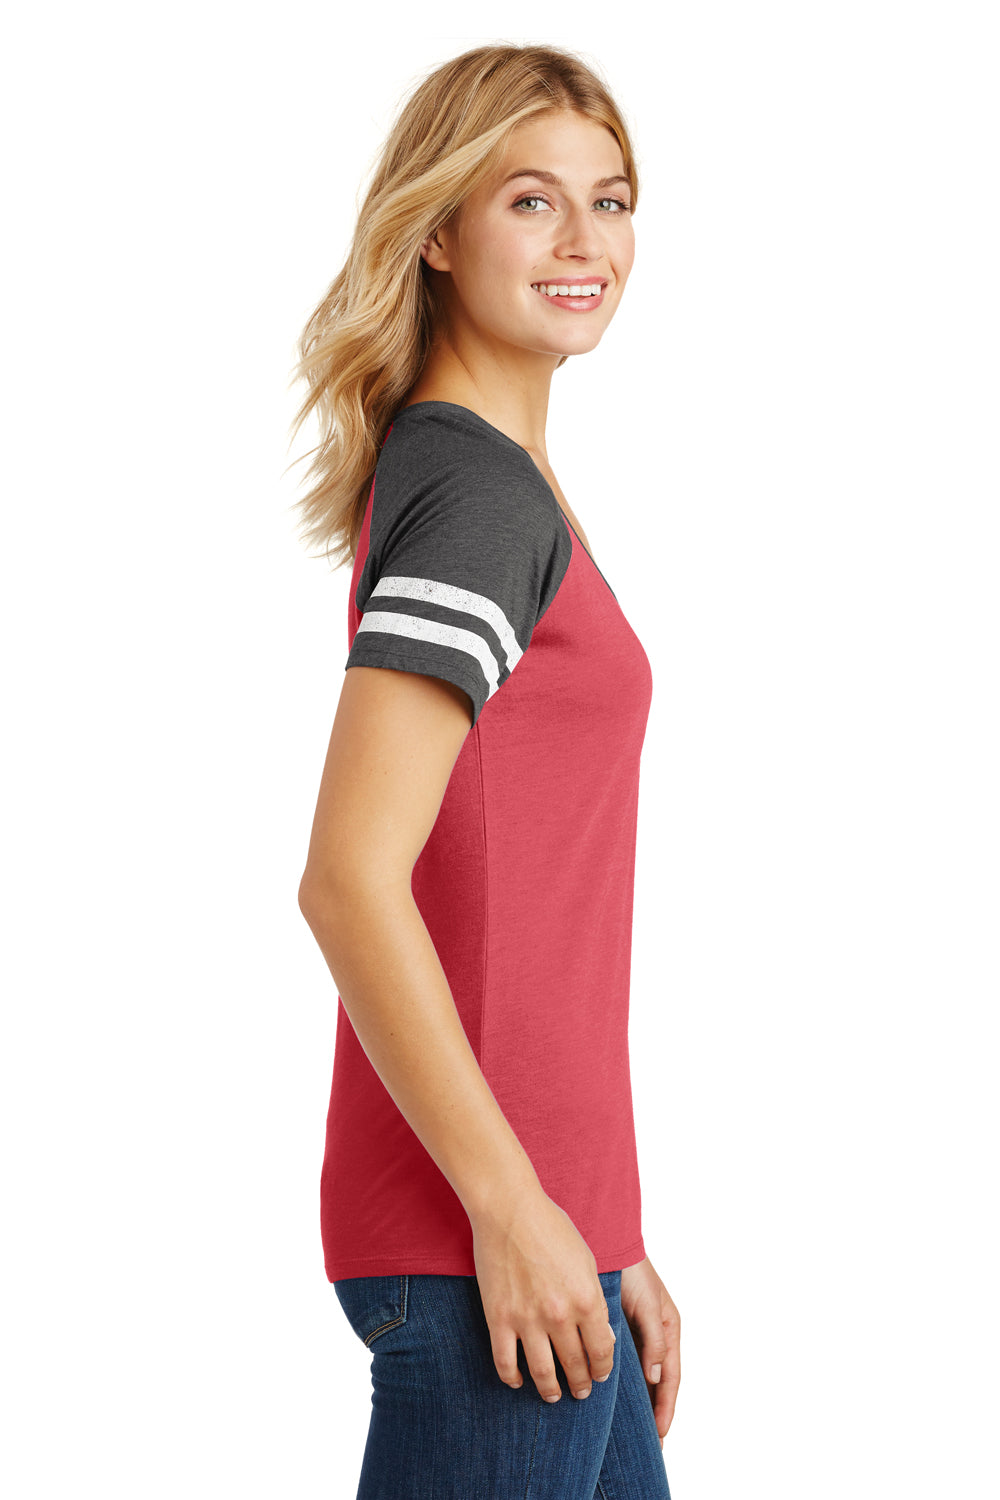 District DM476 Womens Game Short Sleeve V-Neck T-Shirt Heather Red/Charcoal Grey Side